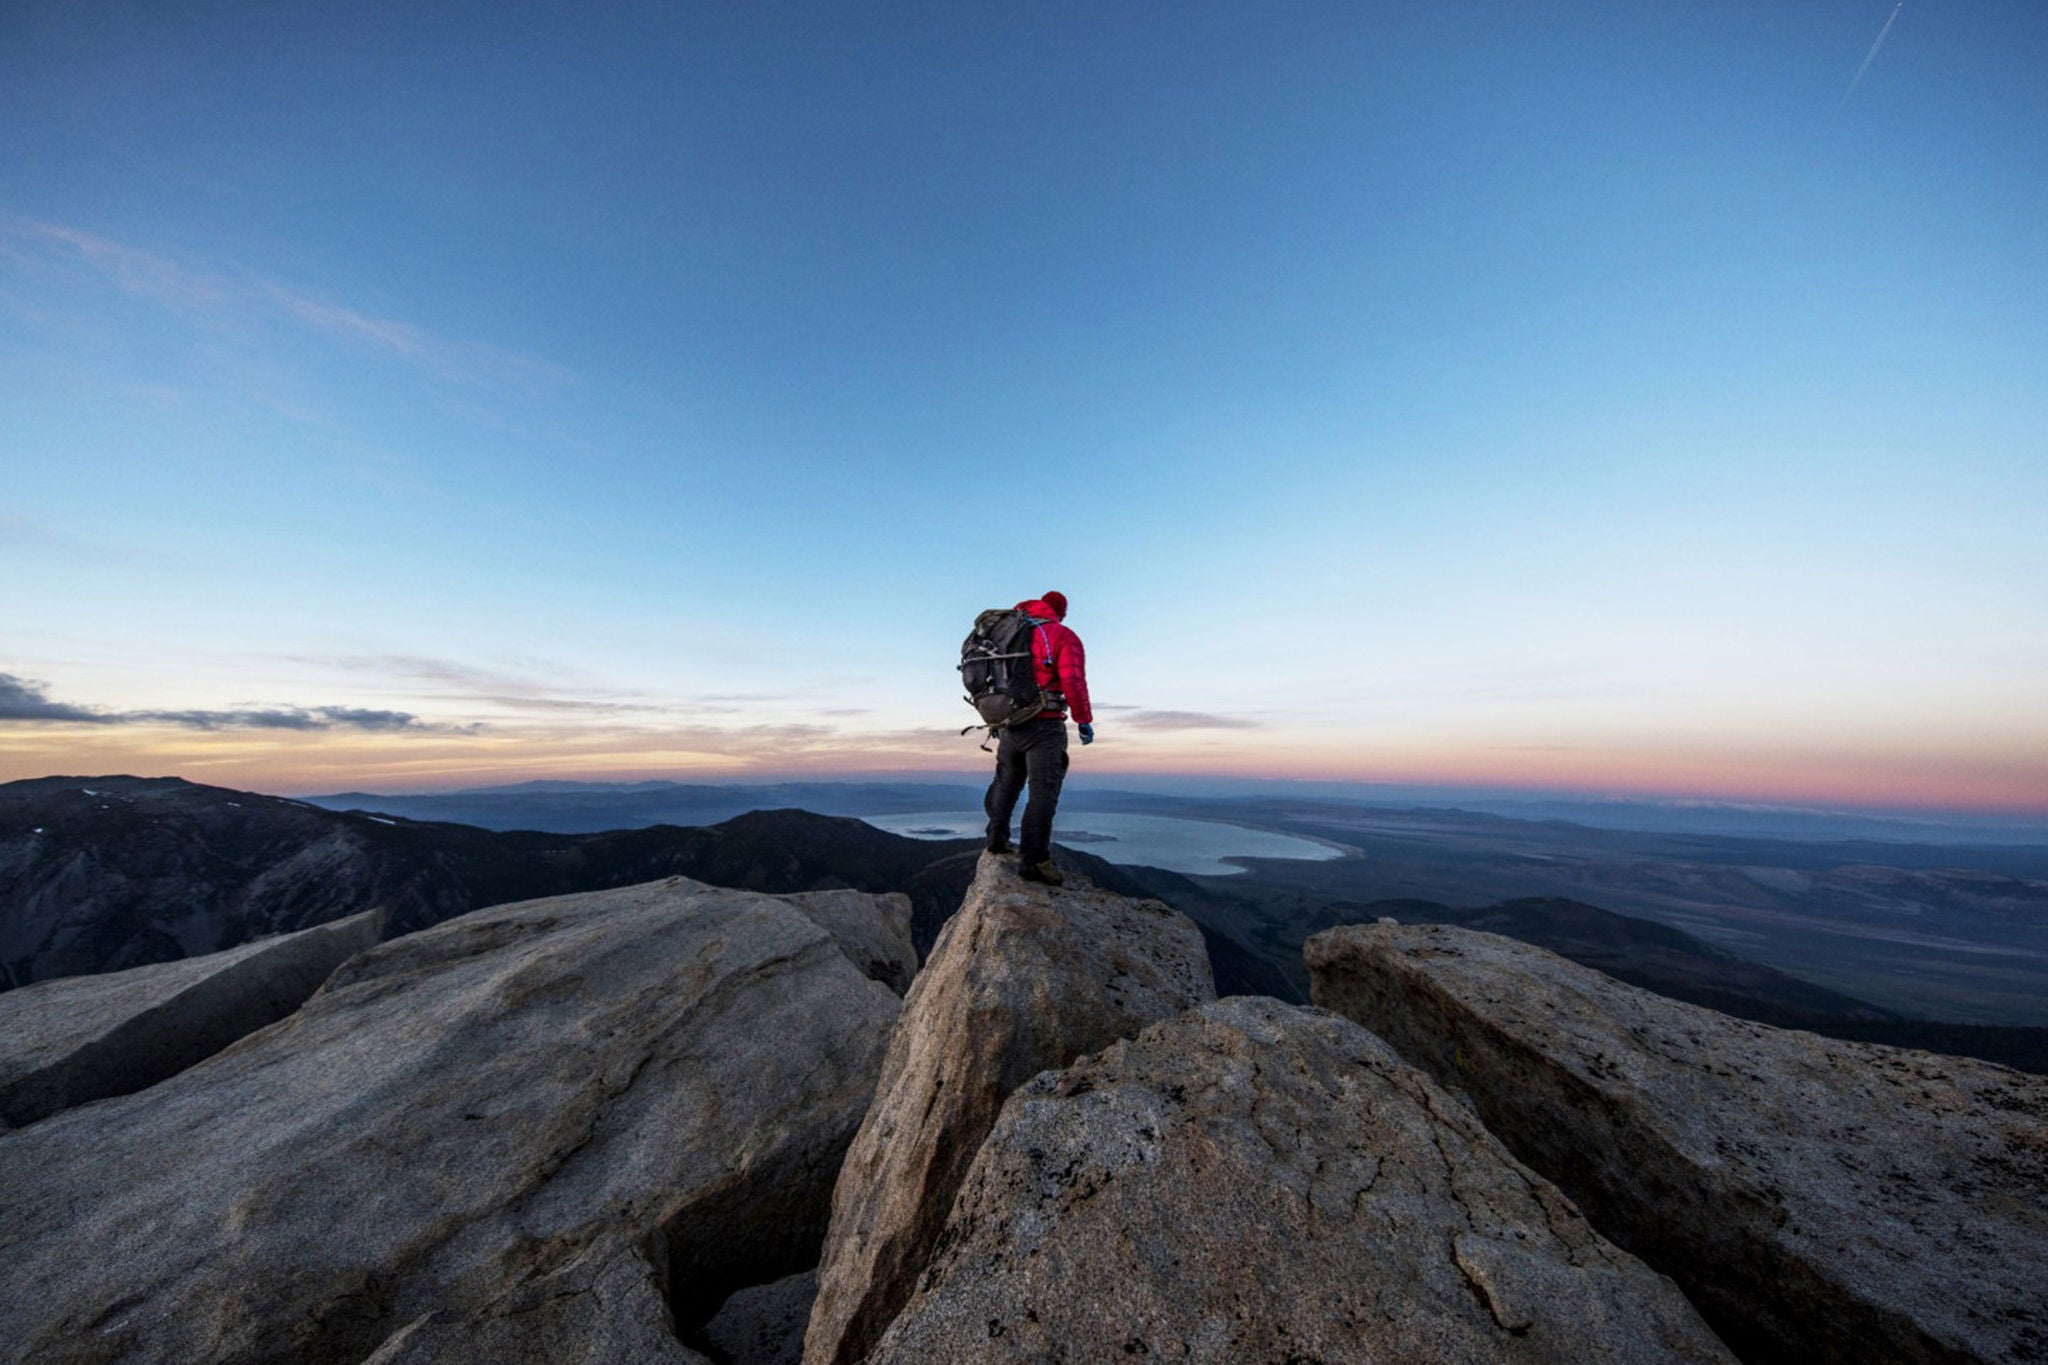 Strong mountain climber on the summit of a peak watching sunset